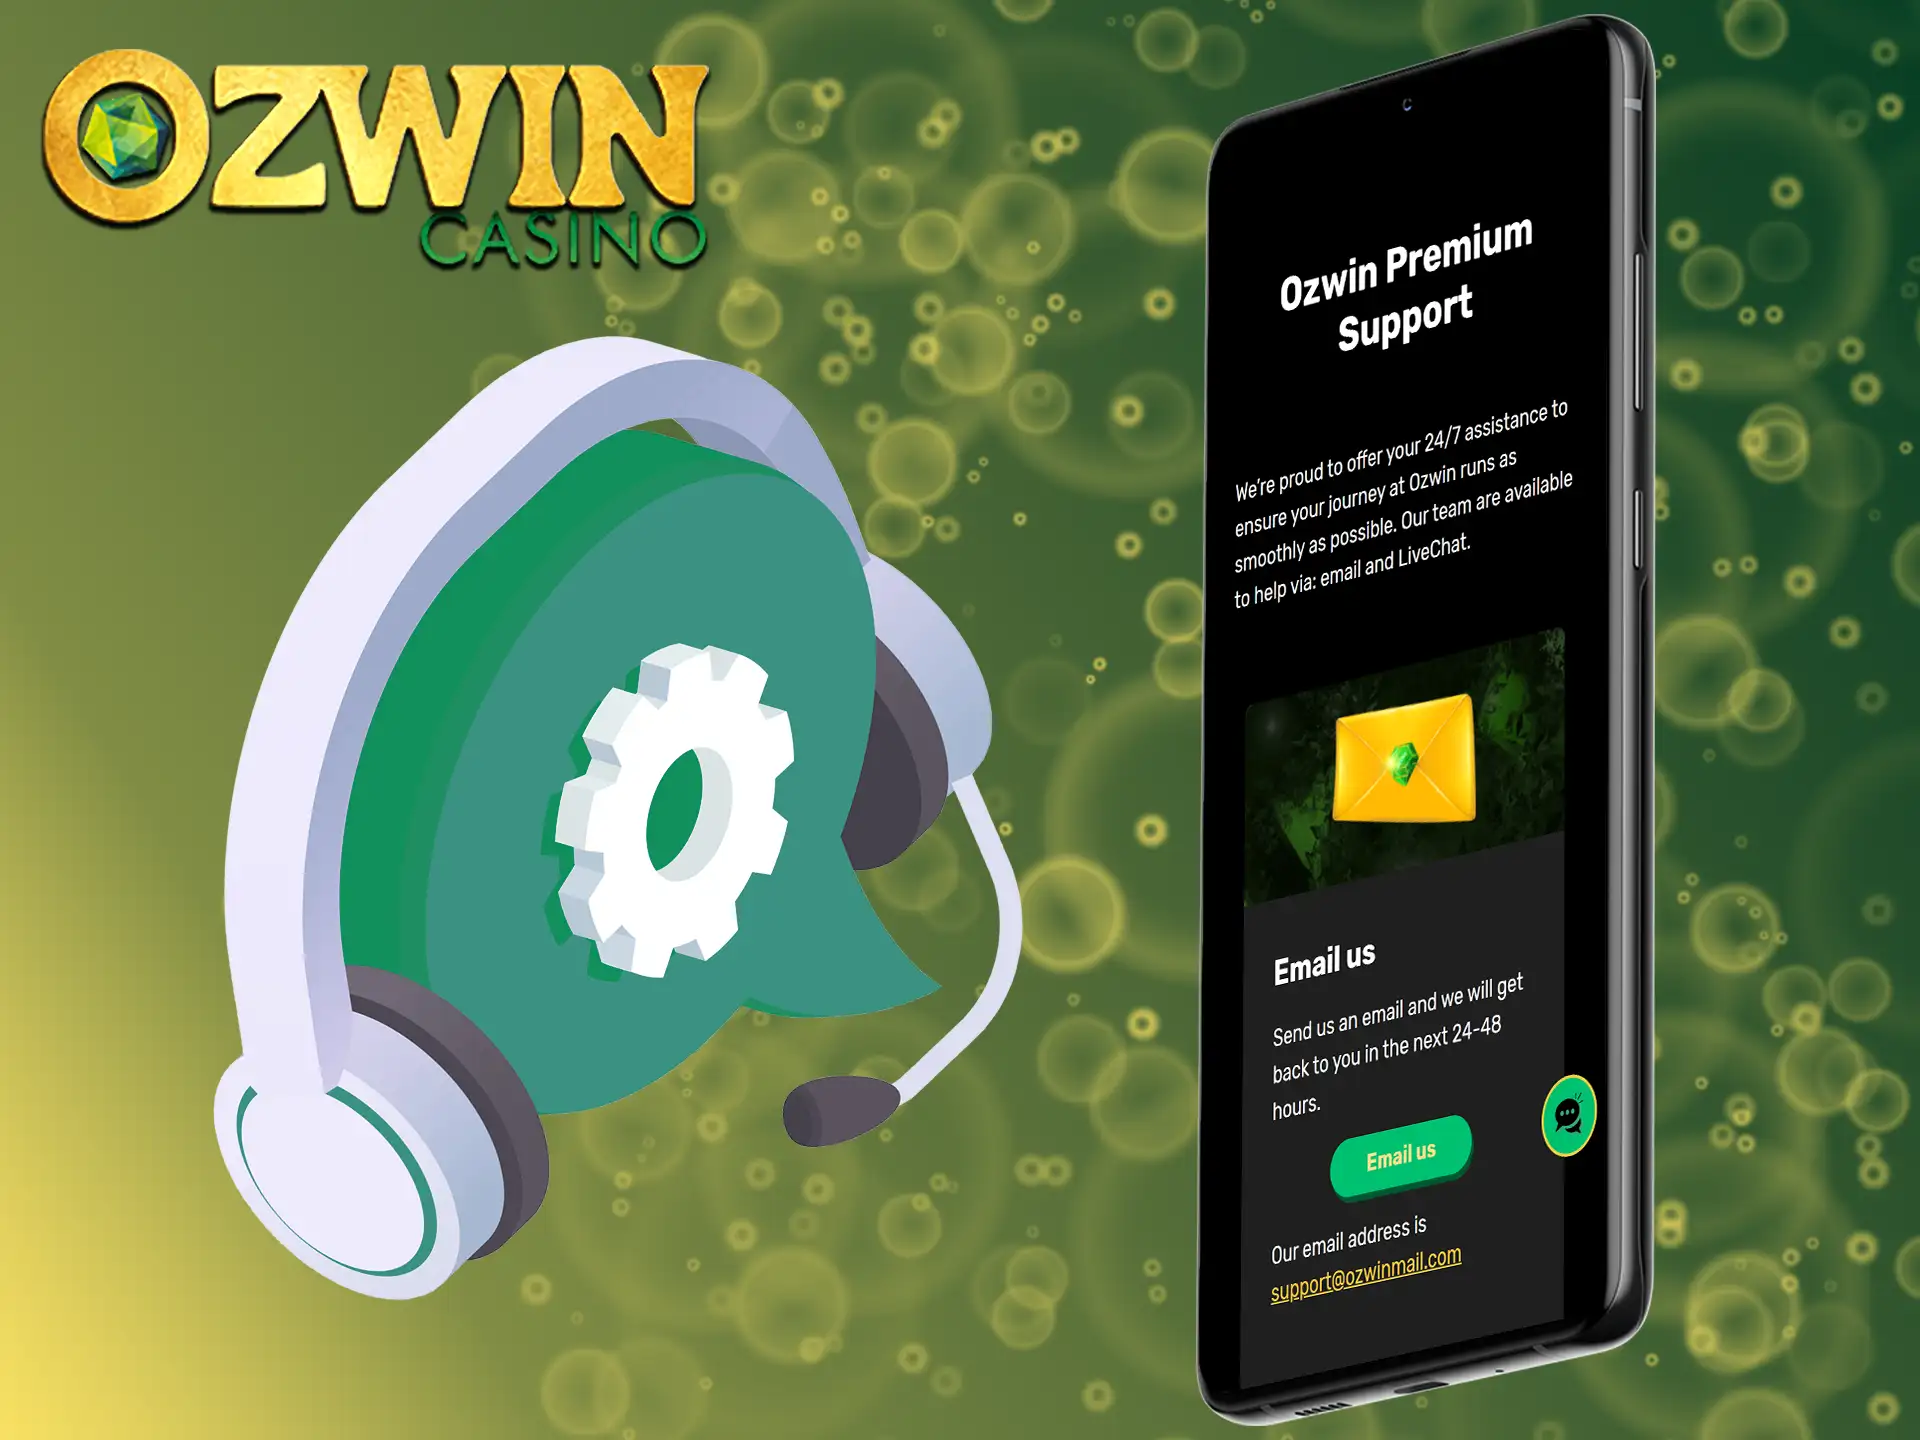 With the Ozwin app, you always have access to first-class support for any questions you may have.